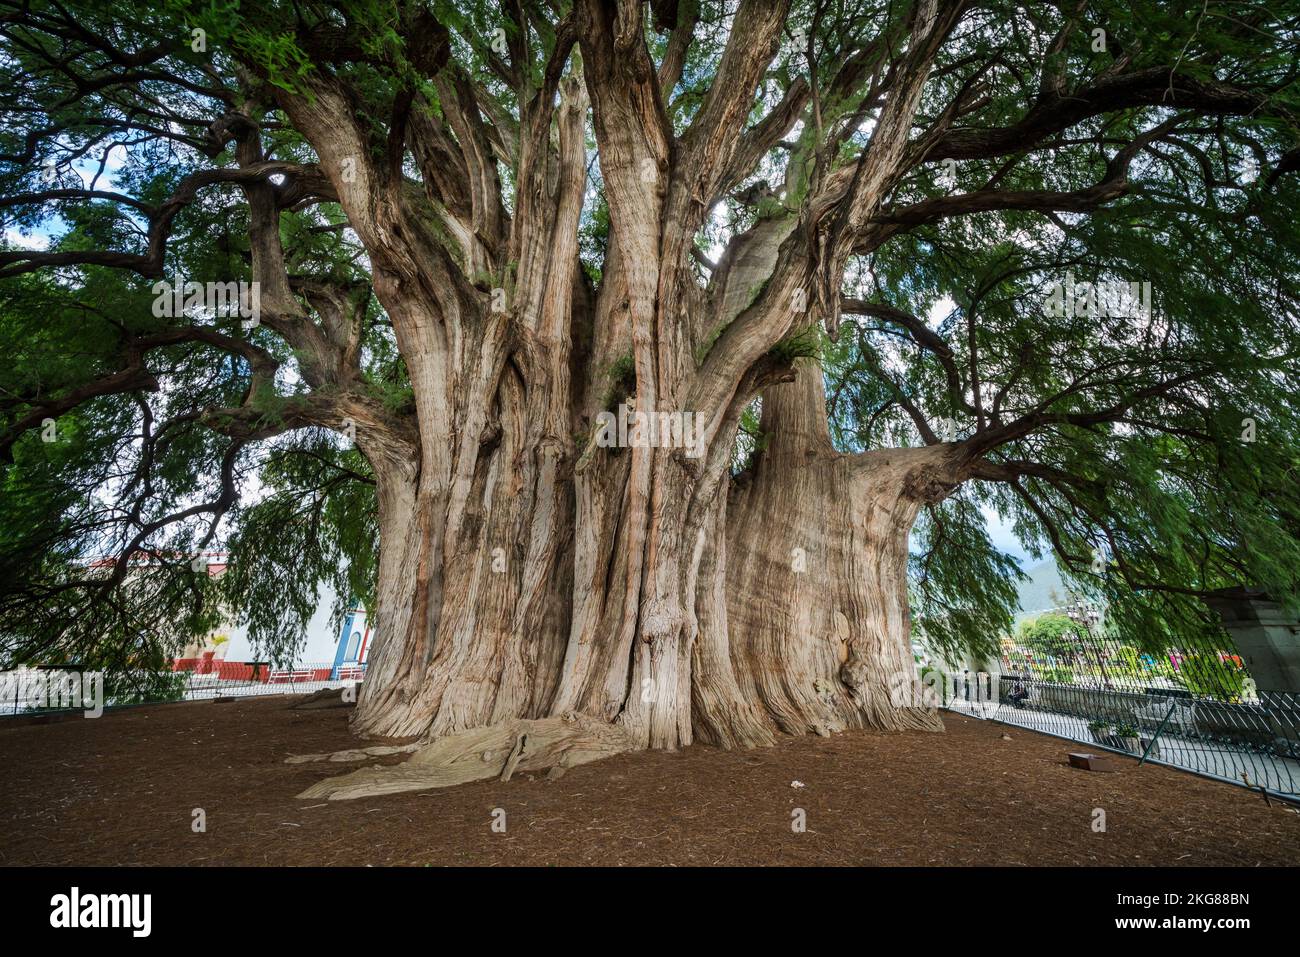 The Tree of Tule in Santa Maria del Tule, Oaxaca Mexico, has the widest trunk of any tree in the world. It is a Montezuma Cypress, estimated to be bet Stock Photo